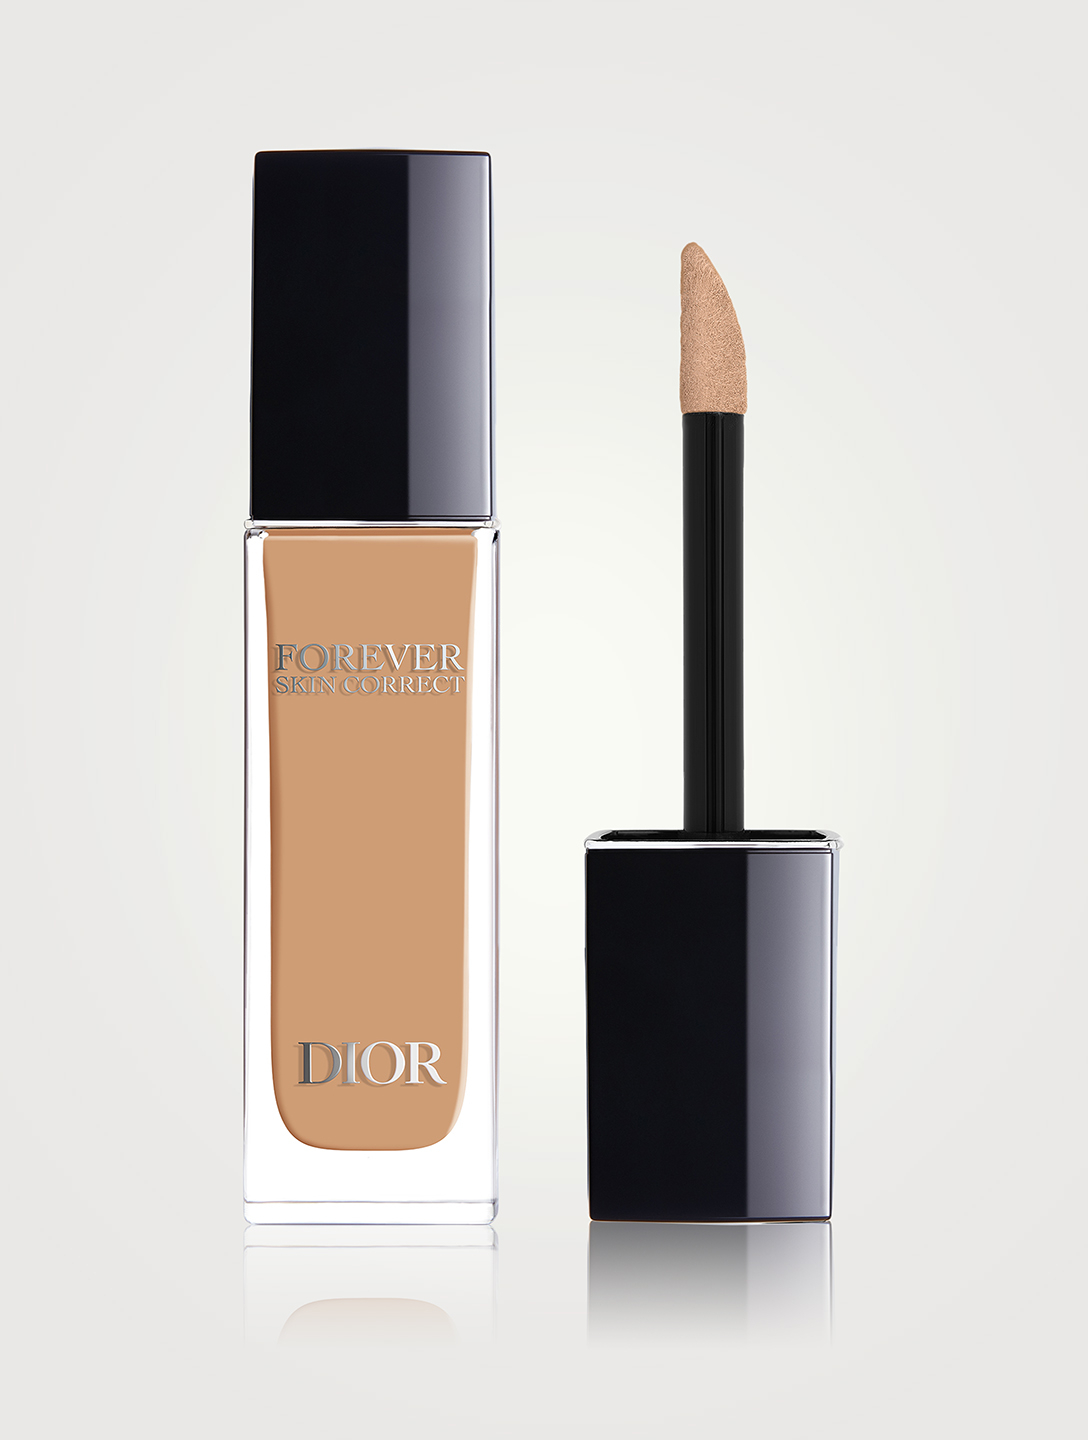 FOREVER SKIN CORRECT, Full-coverage concealer from Dior / 4 W Warm